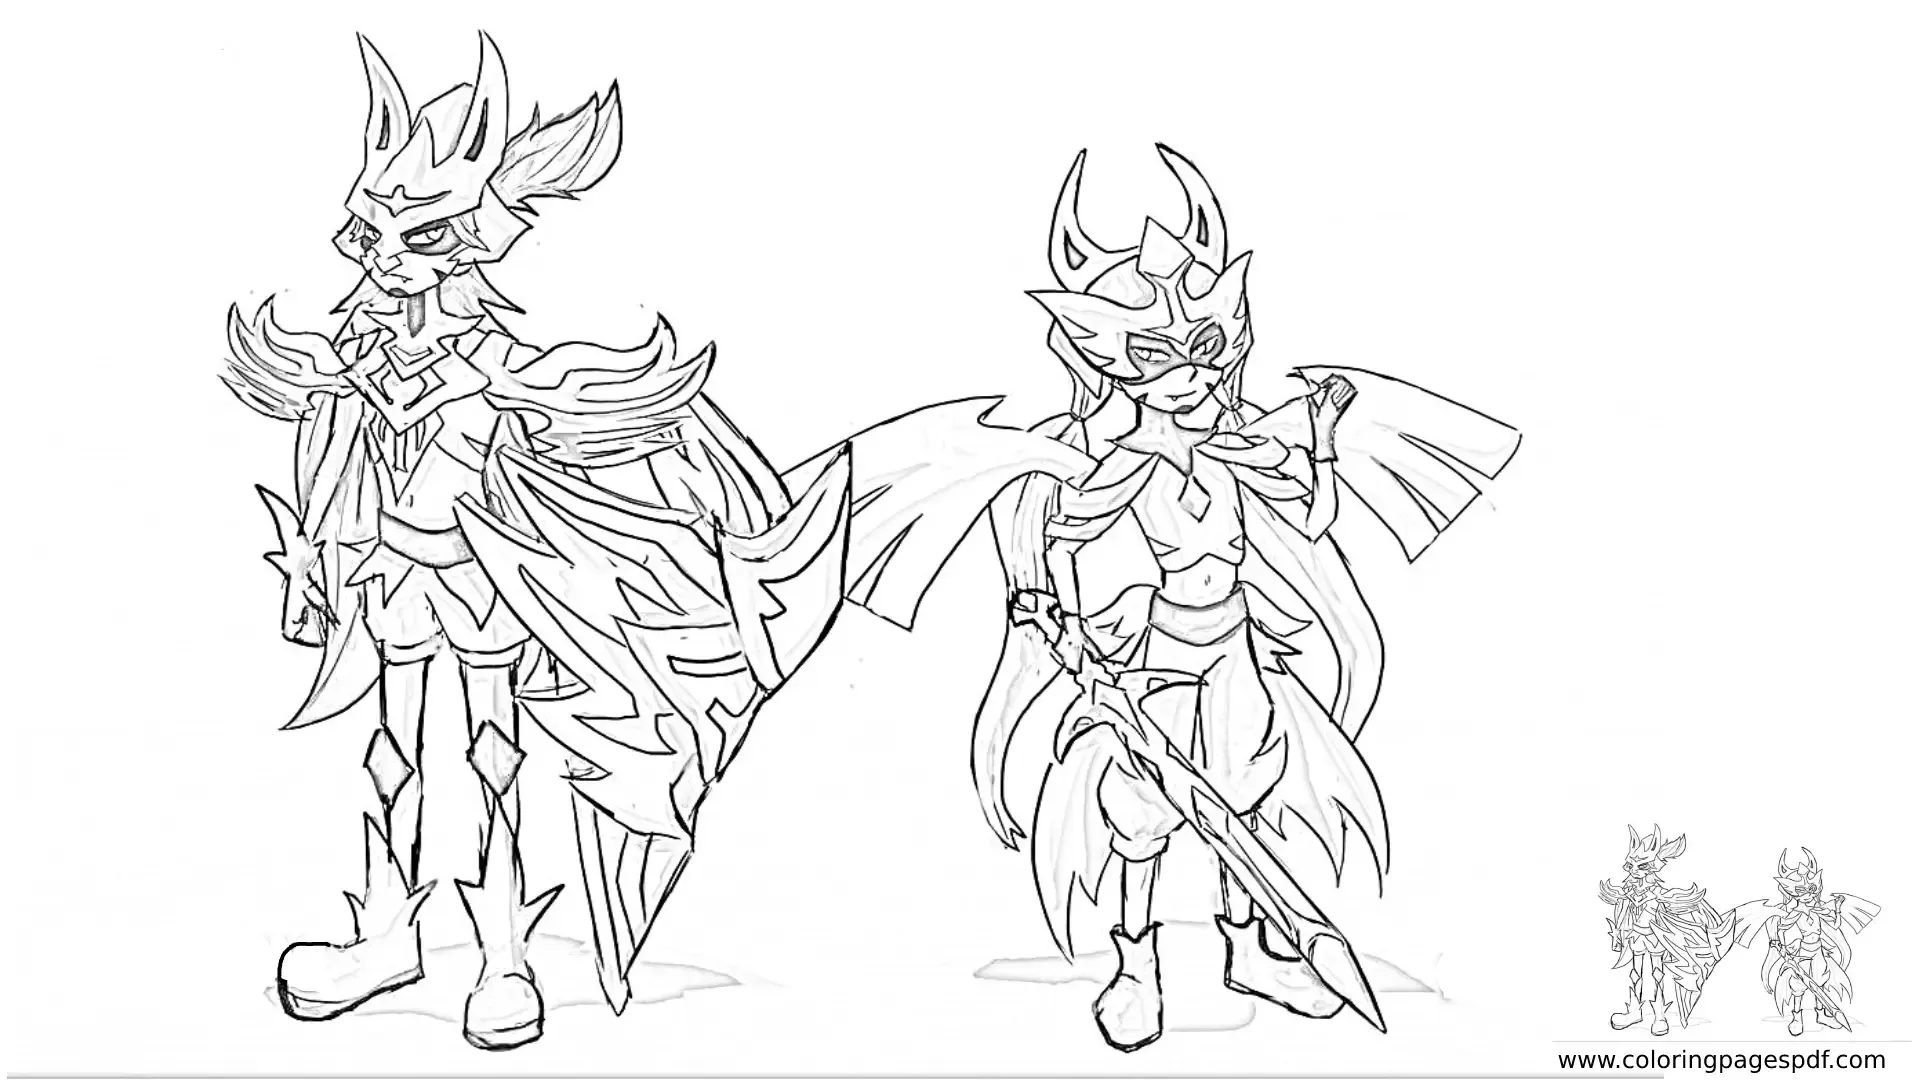 Coloring Page Of Anime Zacian Both Forms